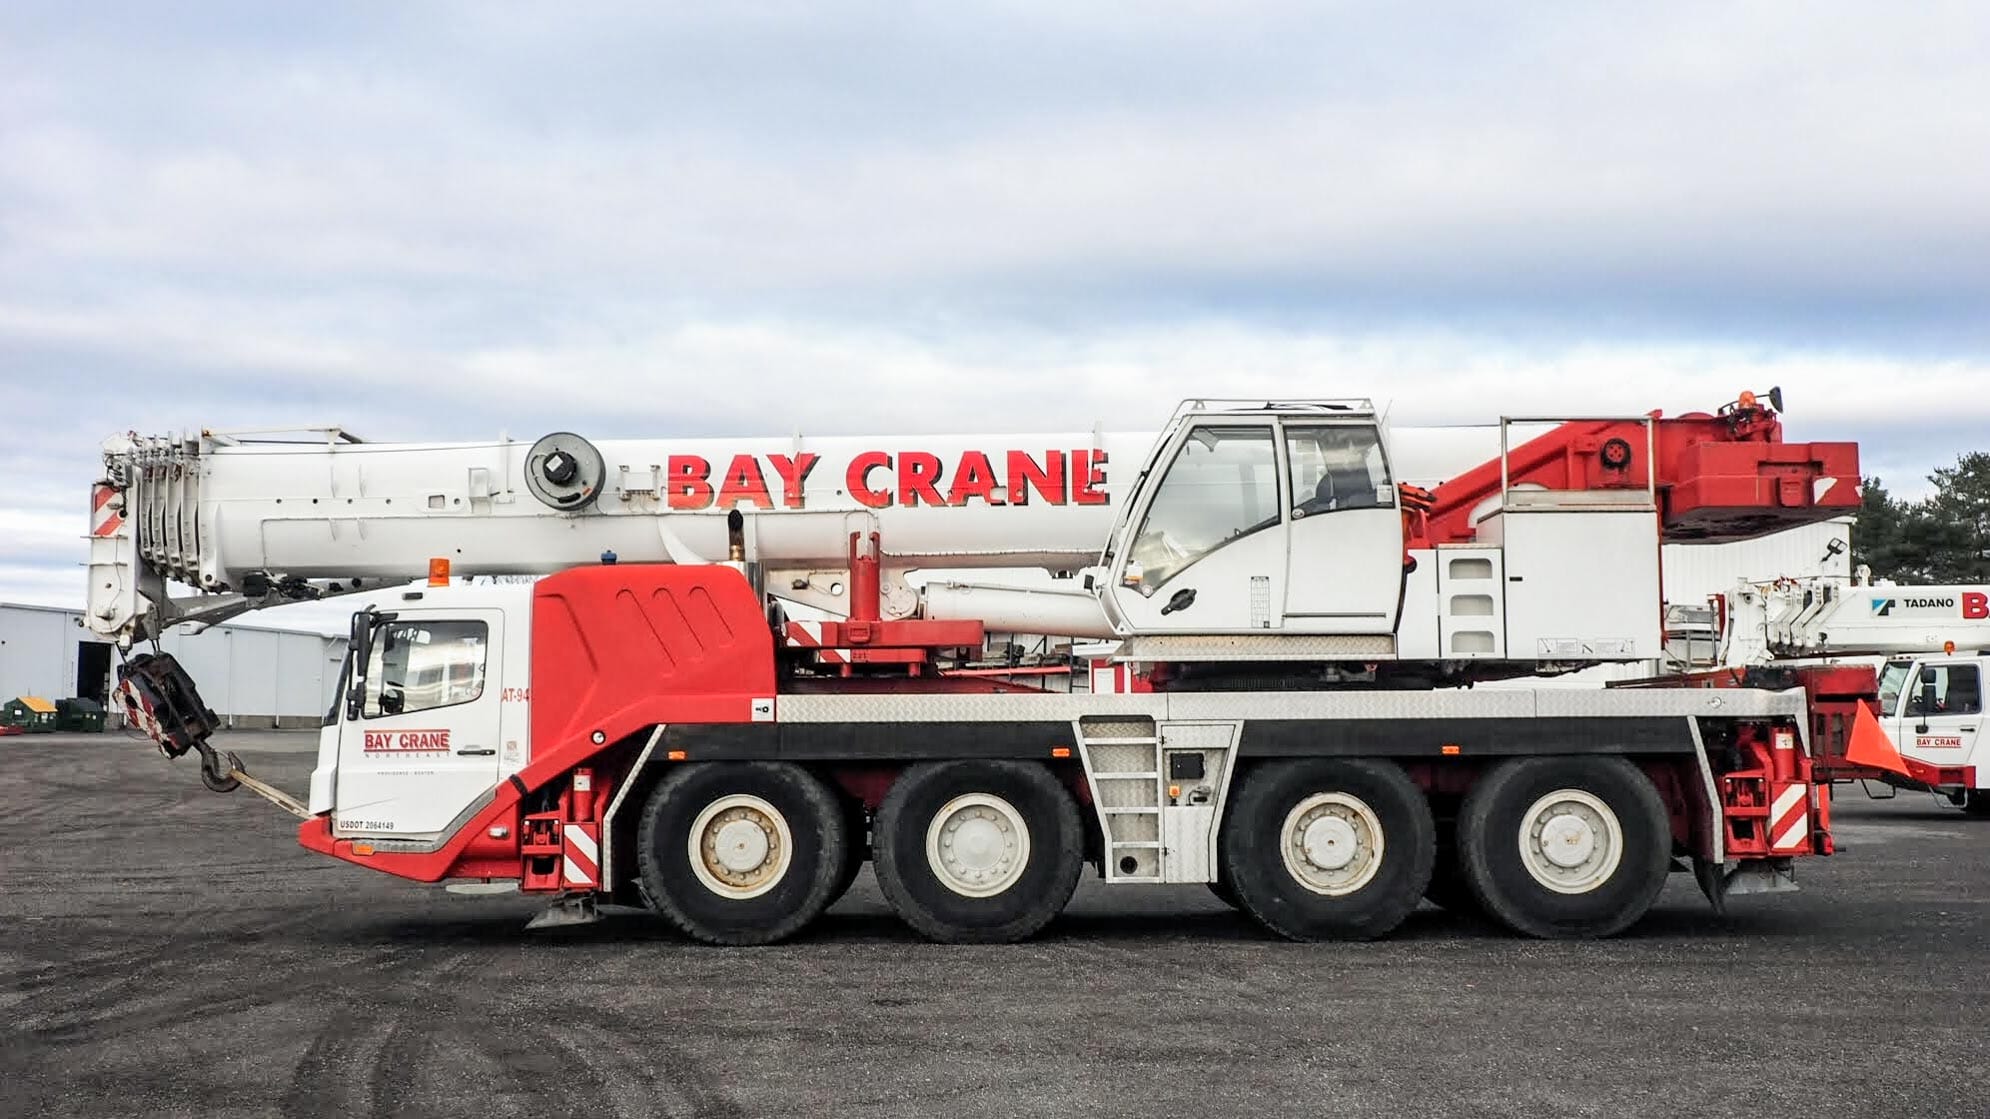 GMK 4115 all terrain crane with a hydraulic expandable